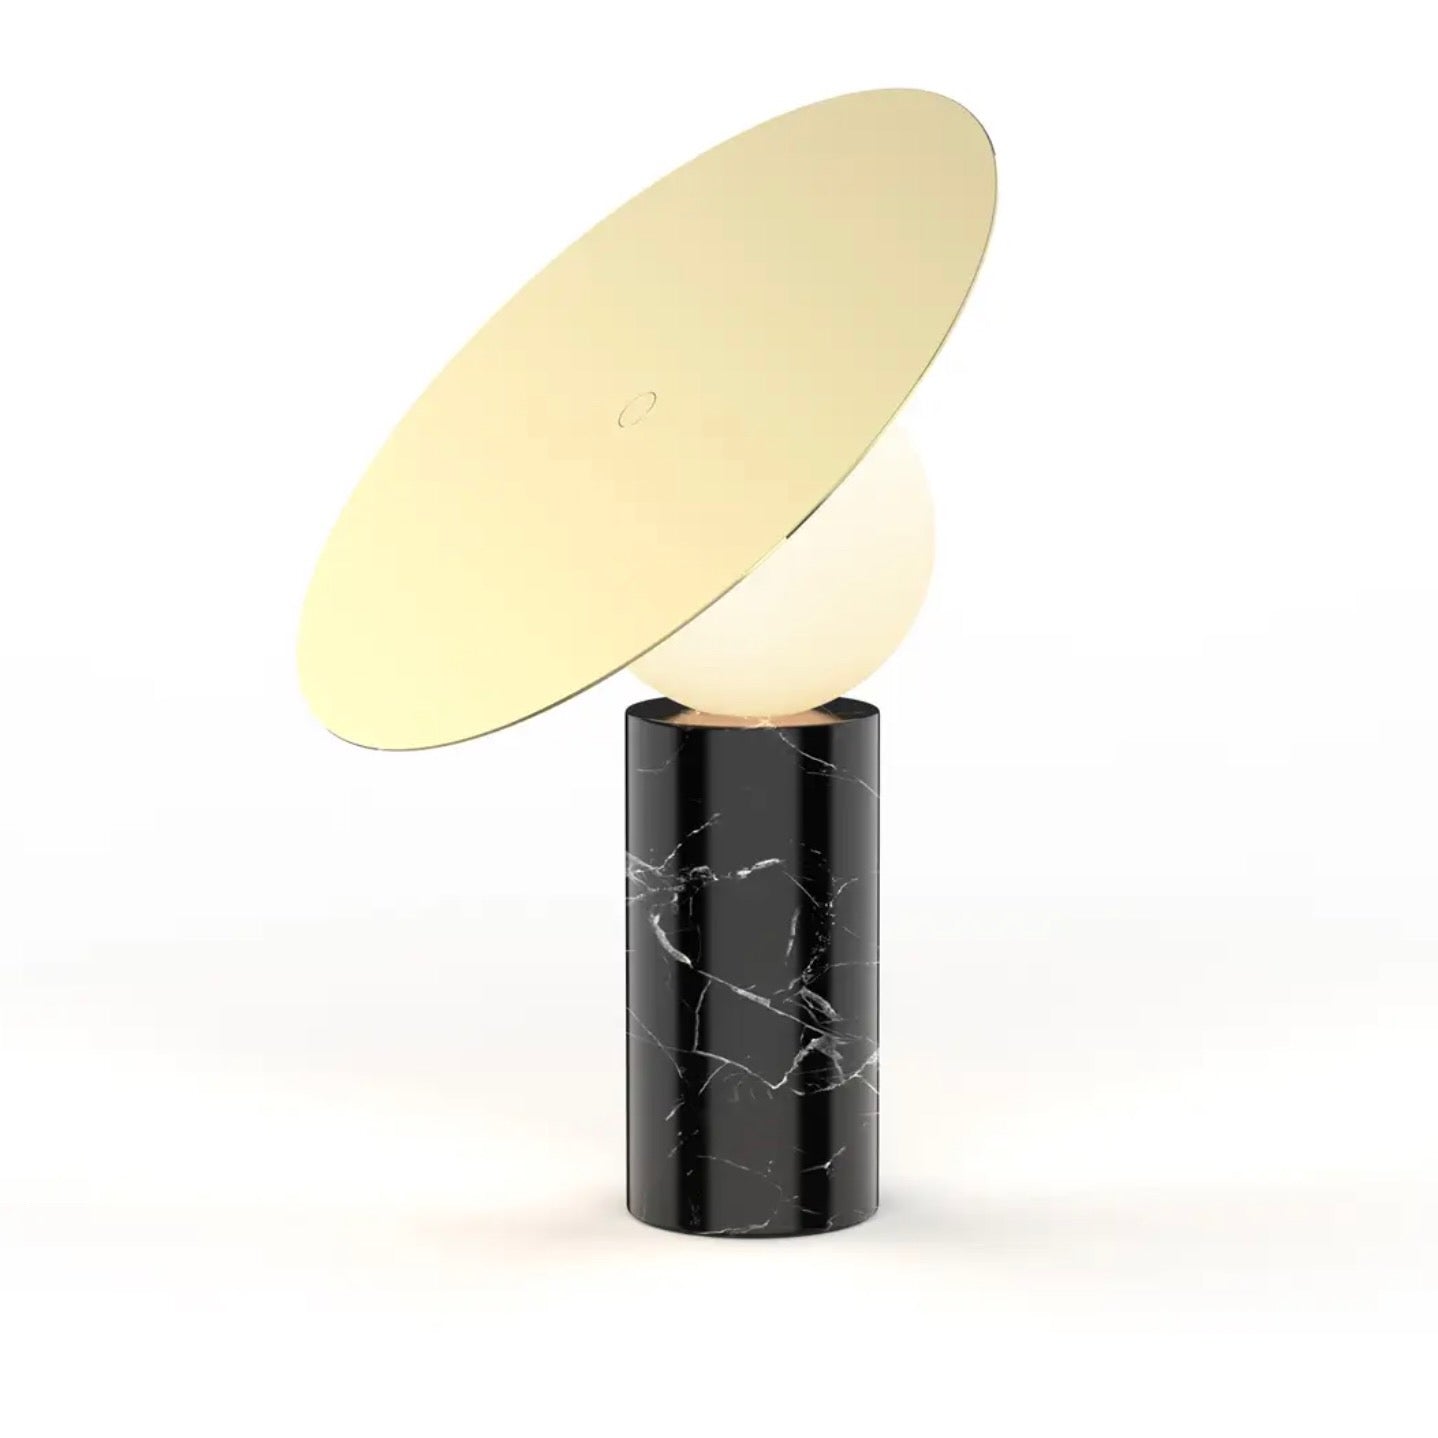 Pablo Designs | Bola Disc Table Light in Marquina Marble & Brass